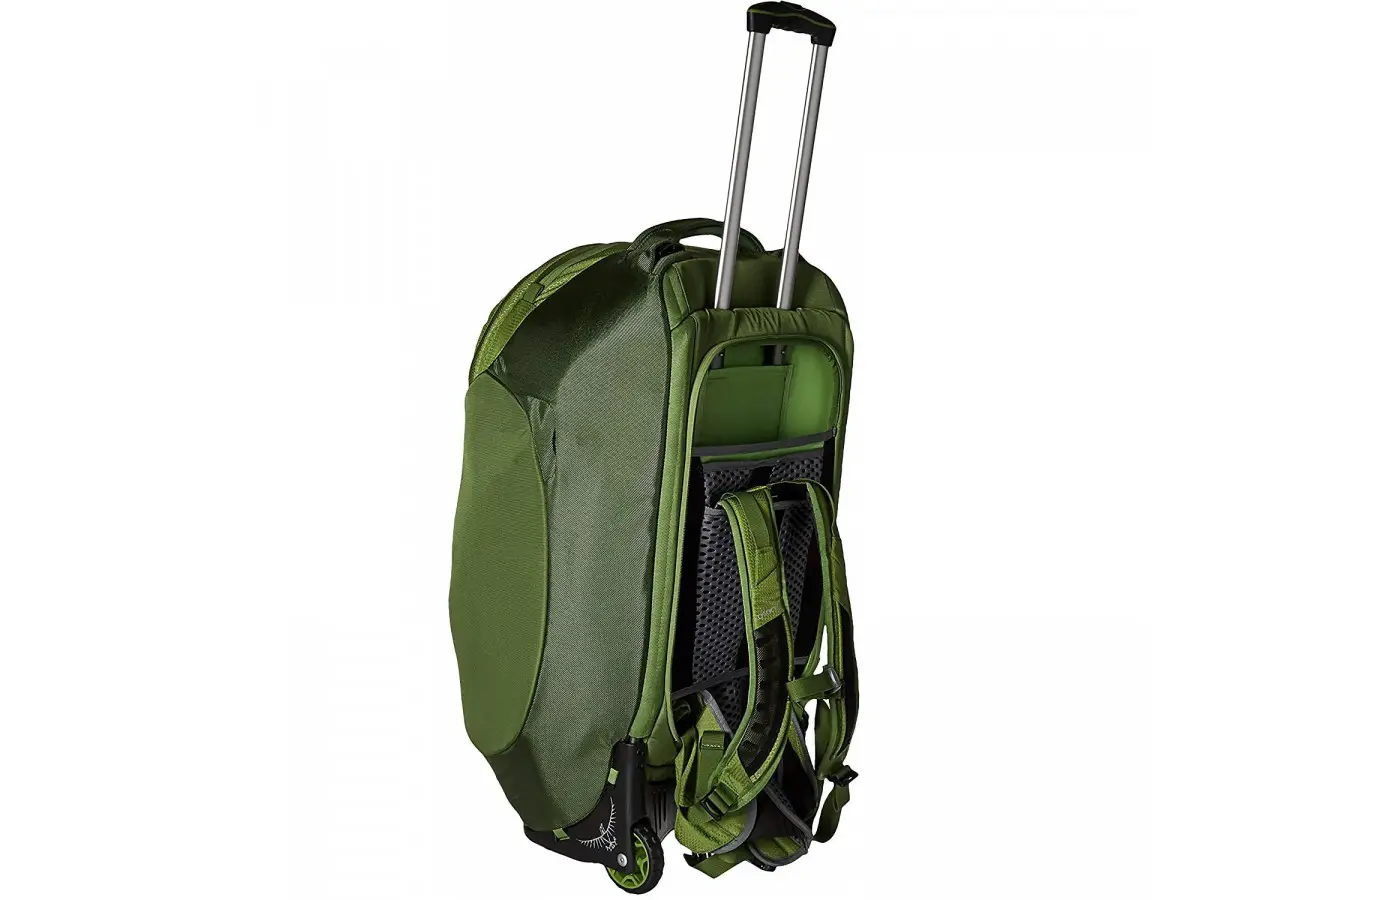 The Osprey Sojourn 80 offers a back panel suspension components for increased packing capacity.